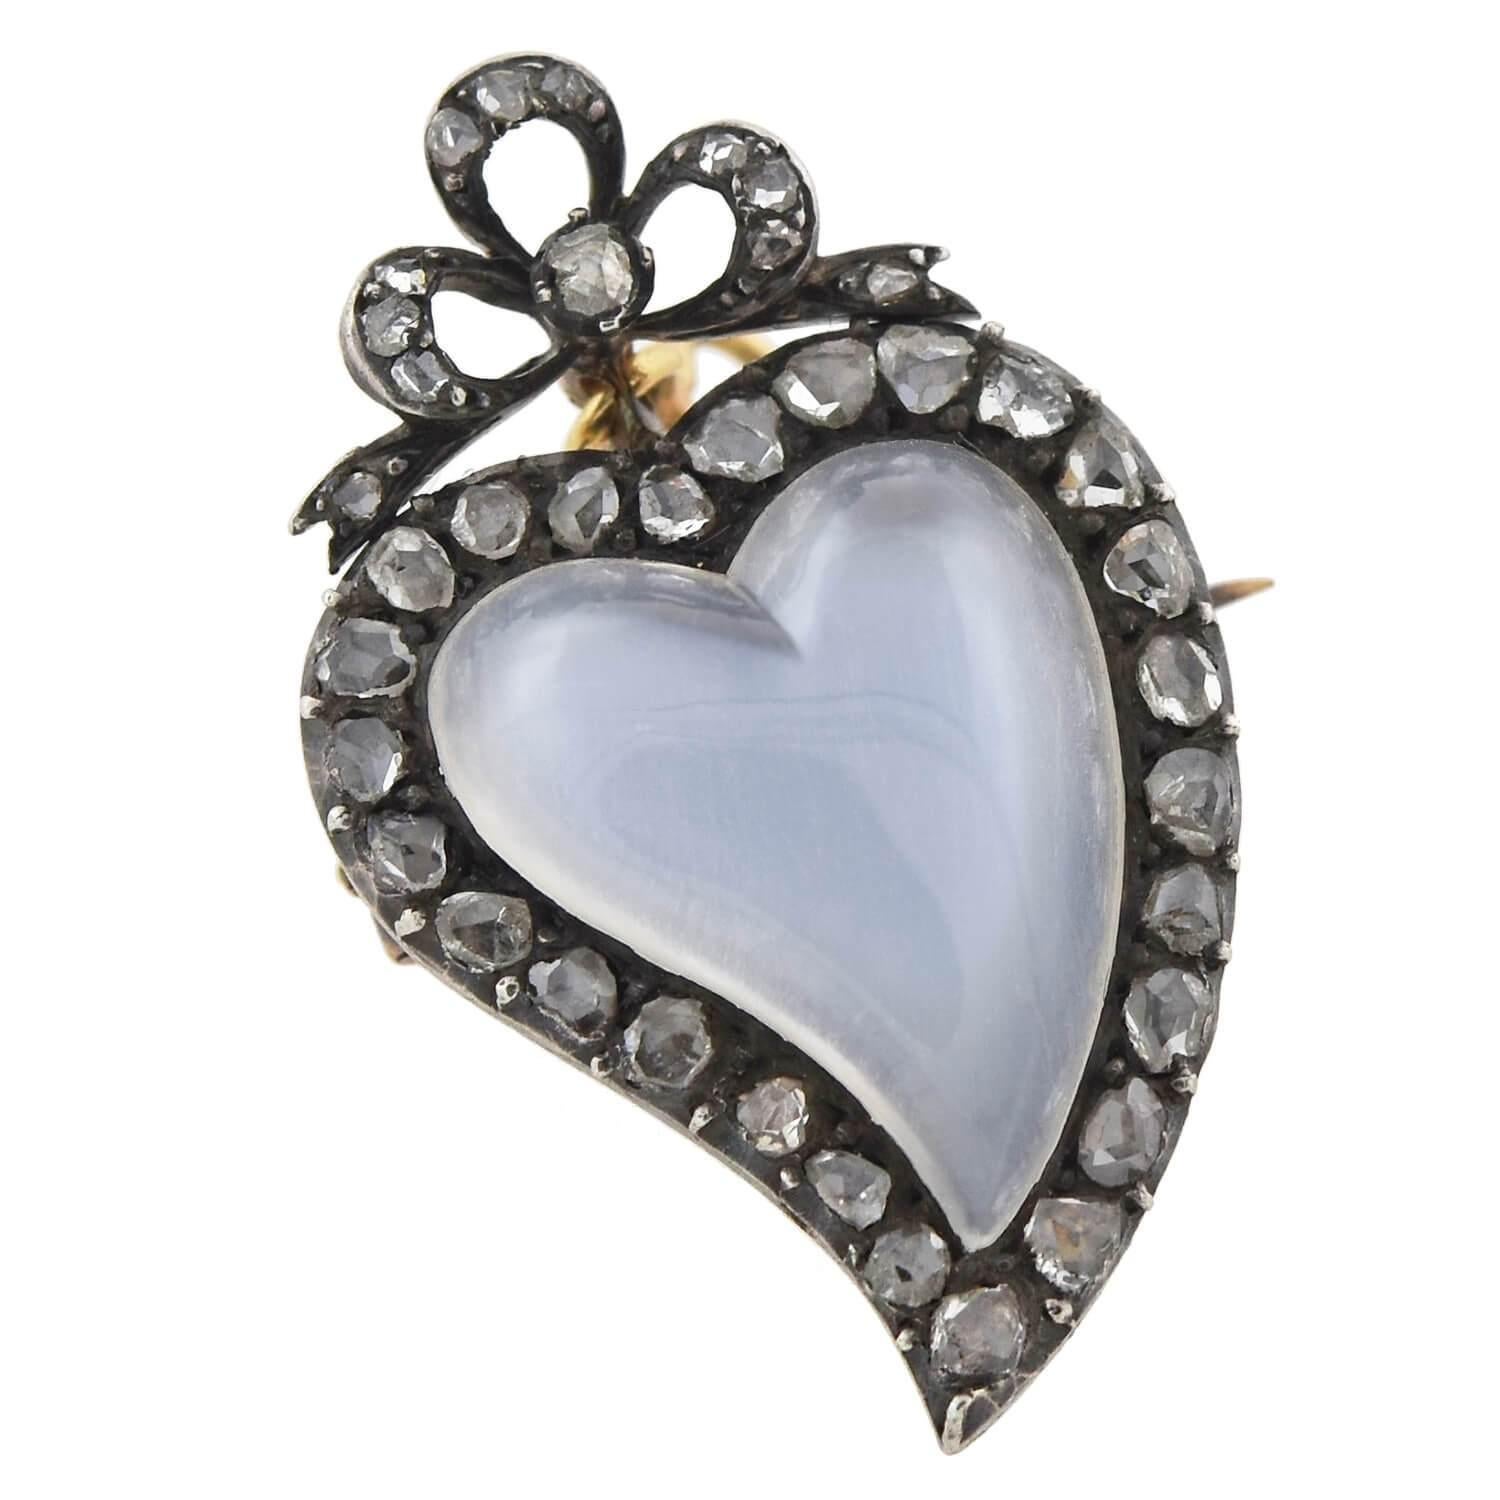 The base of a witch’s heart jewel most commonly twists to the right side (from the viewer’s angle) and they have their origins in the 15th century. At the time, they were worn for their ‘magical properties’ to ward off evil spirits and for